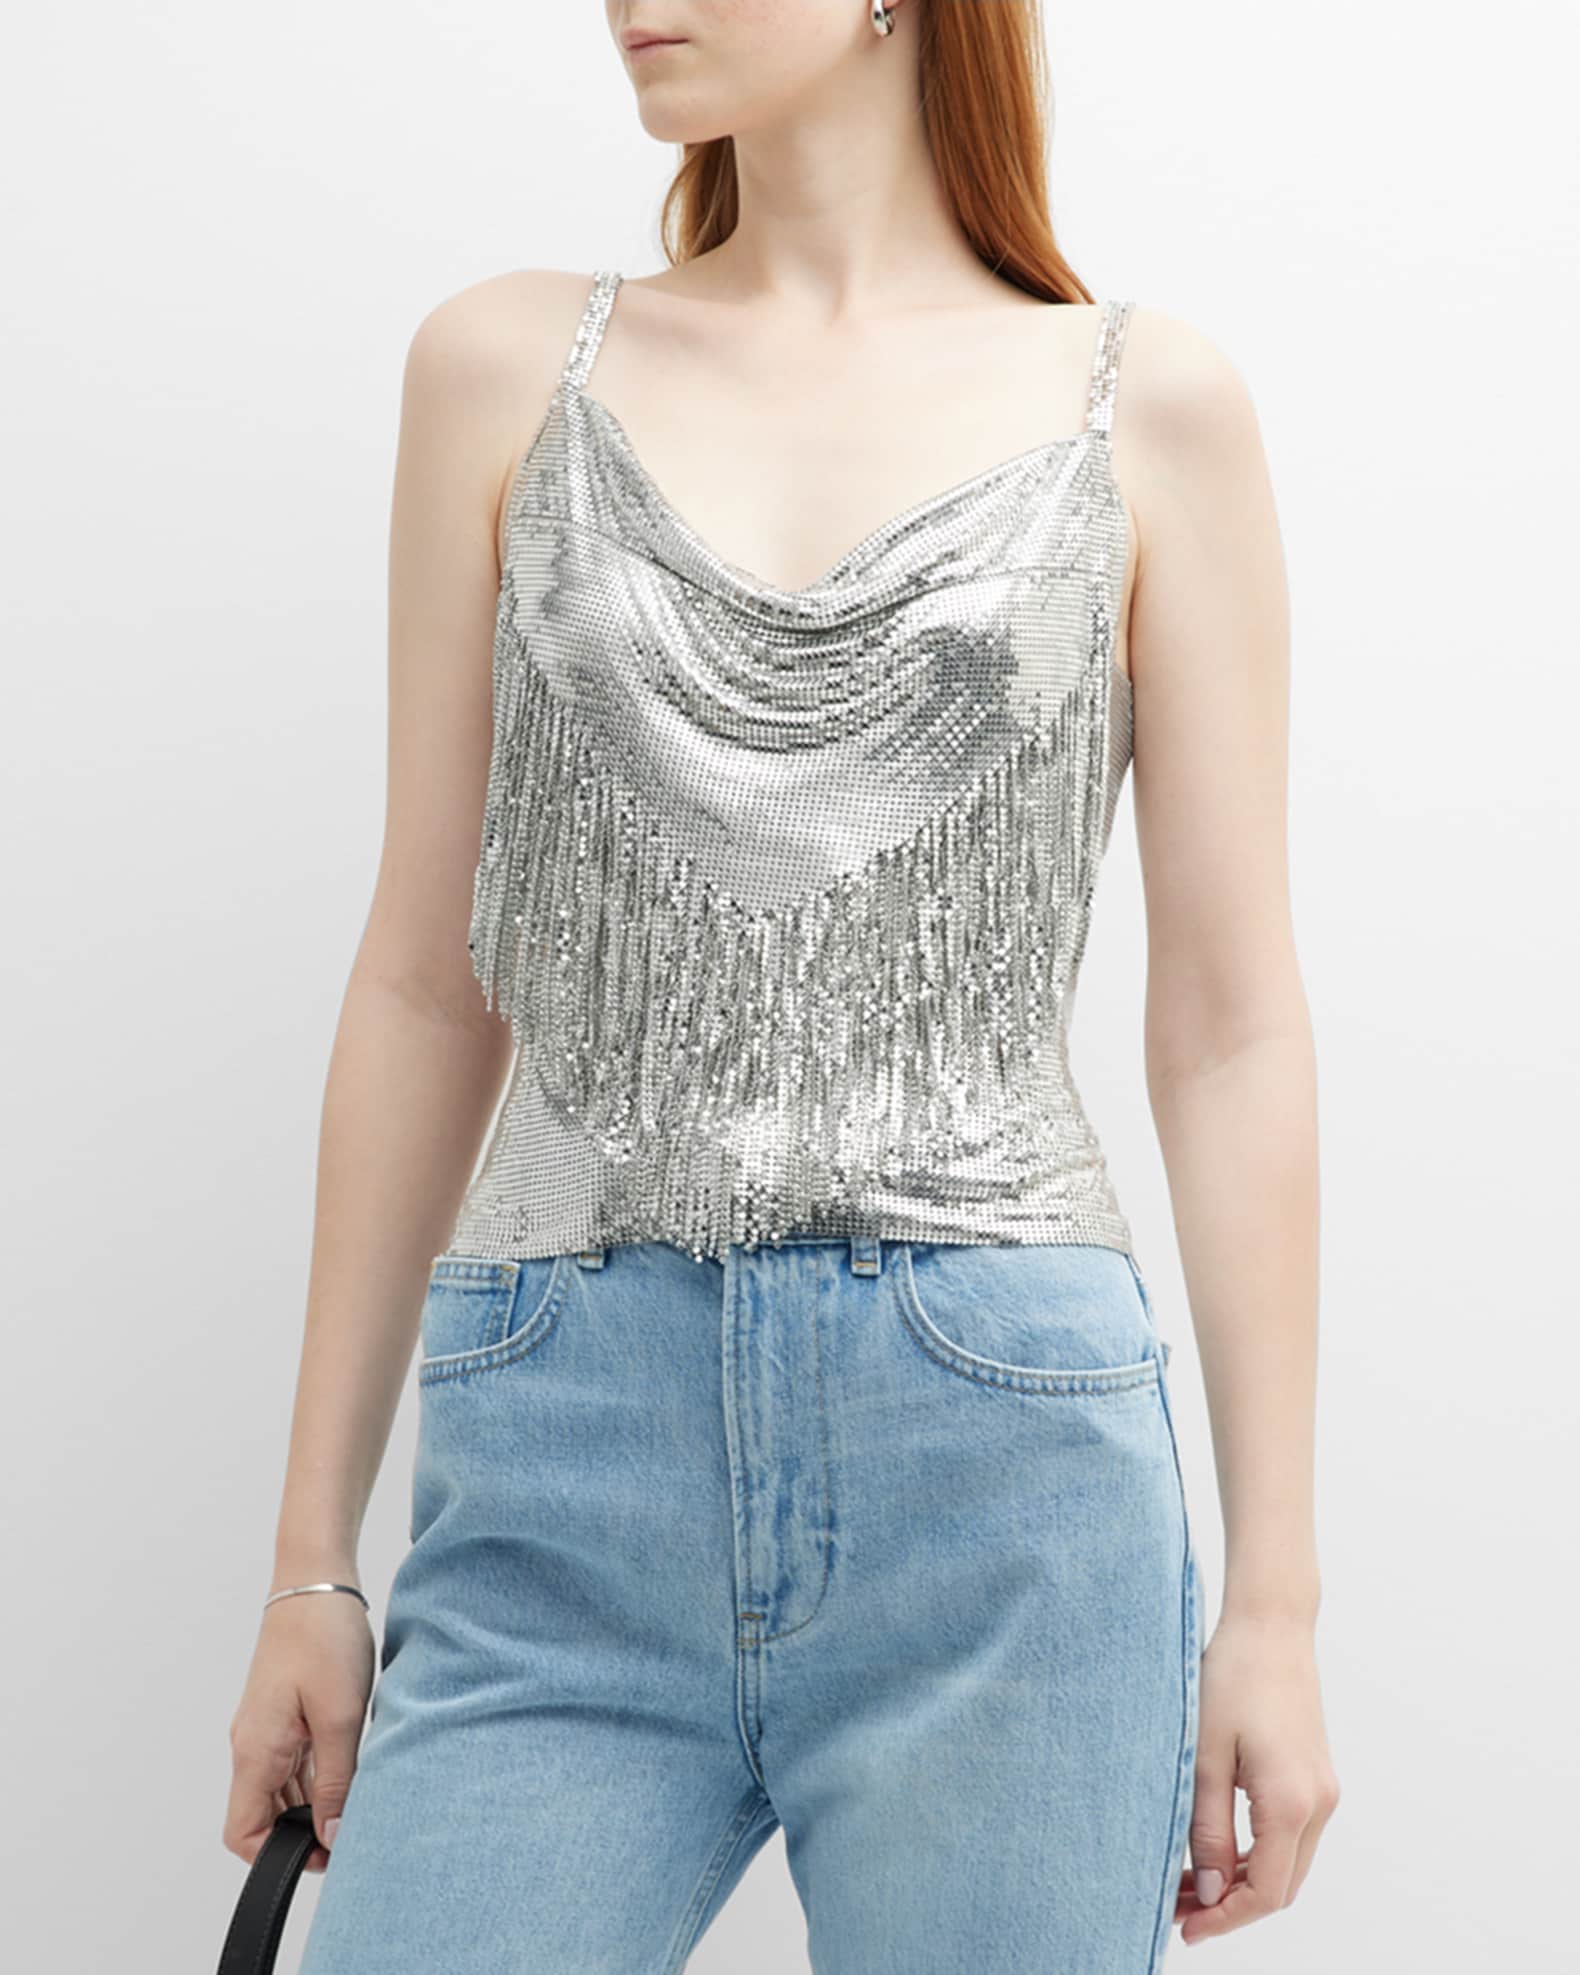 Rabanne Cowl-Neck Fringe Chainmail Tank Top, Silver, Women's, 4, Shirts Tops Blouses Tank Tops Sleeveless Tees